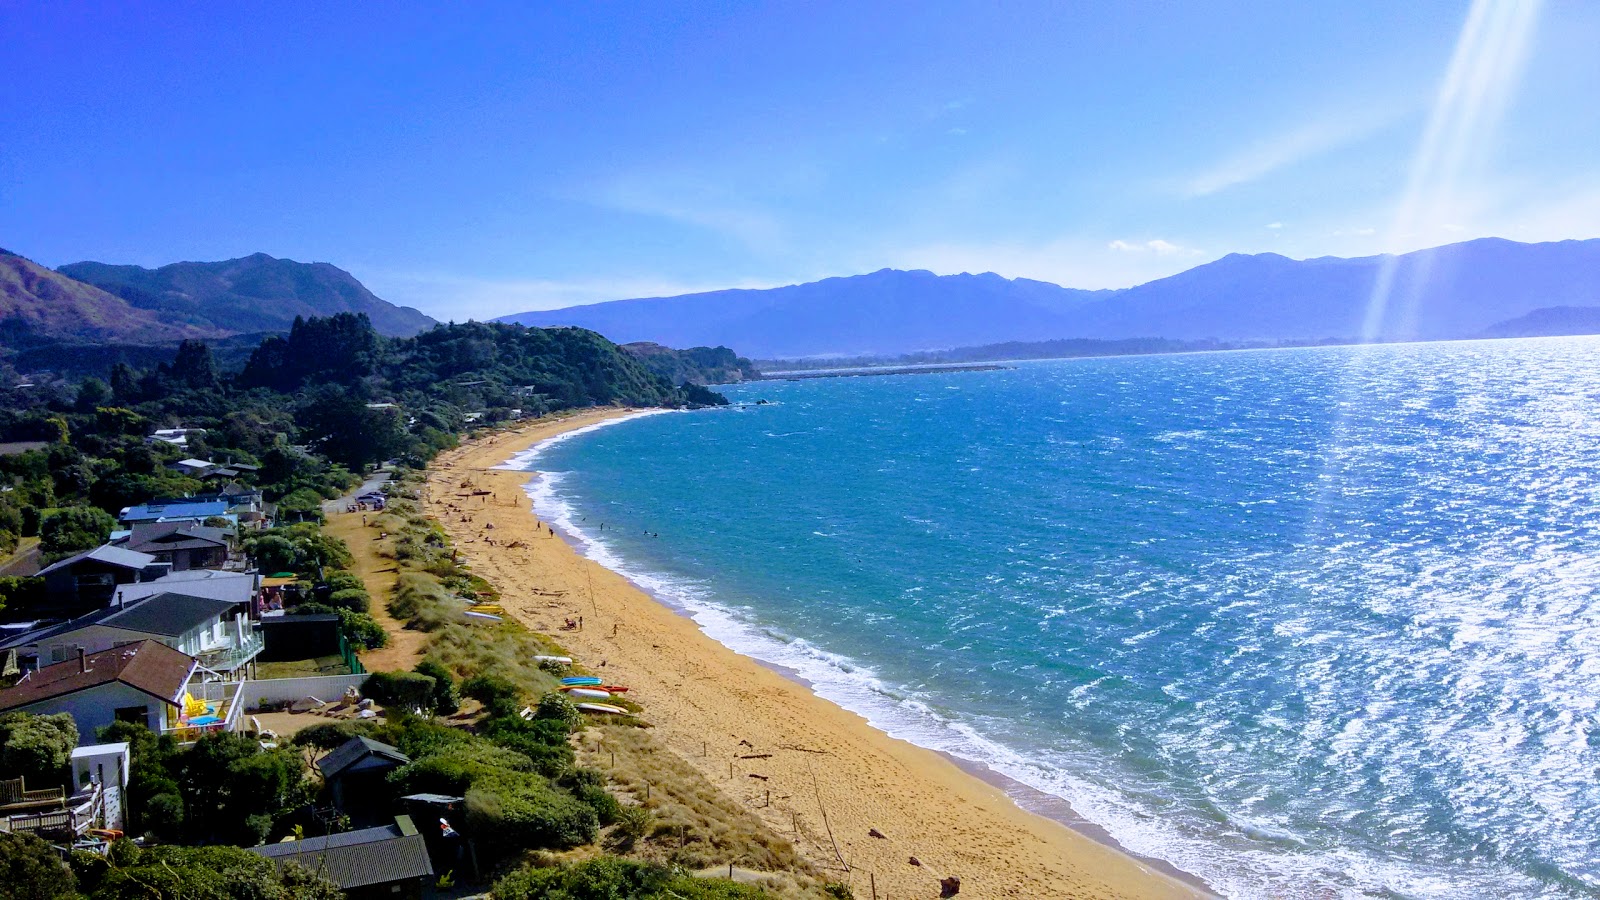 Photo of Tata Beach surrounded by mountains